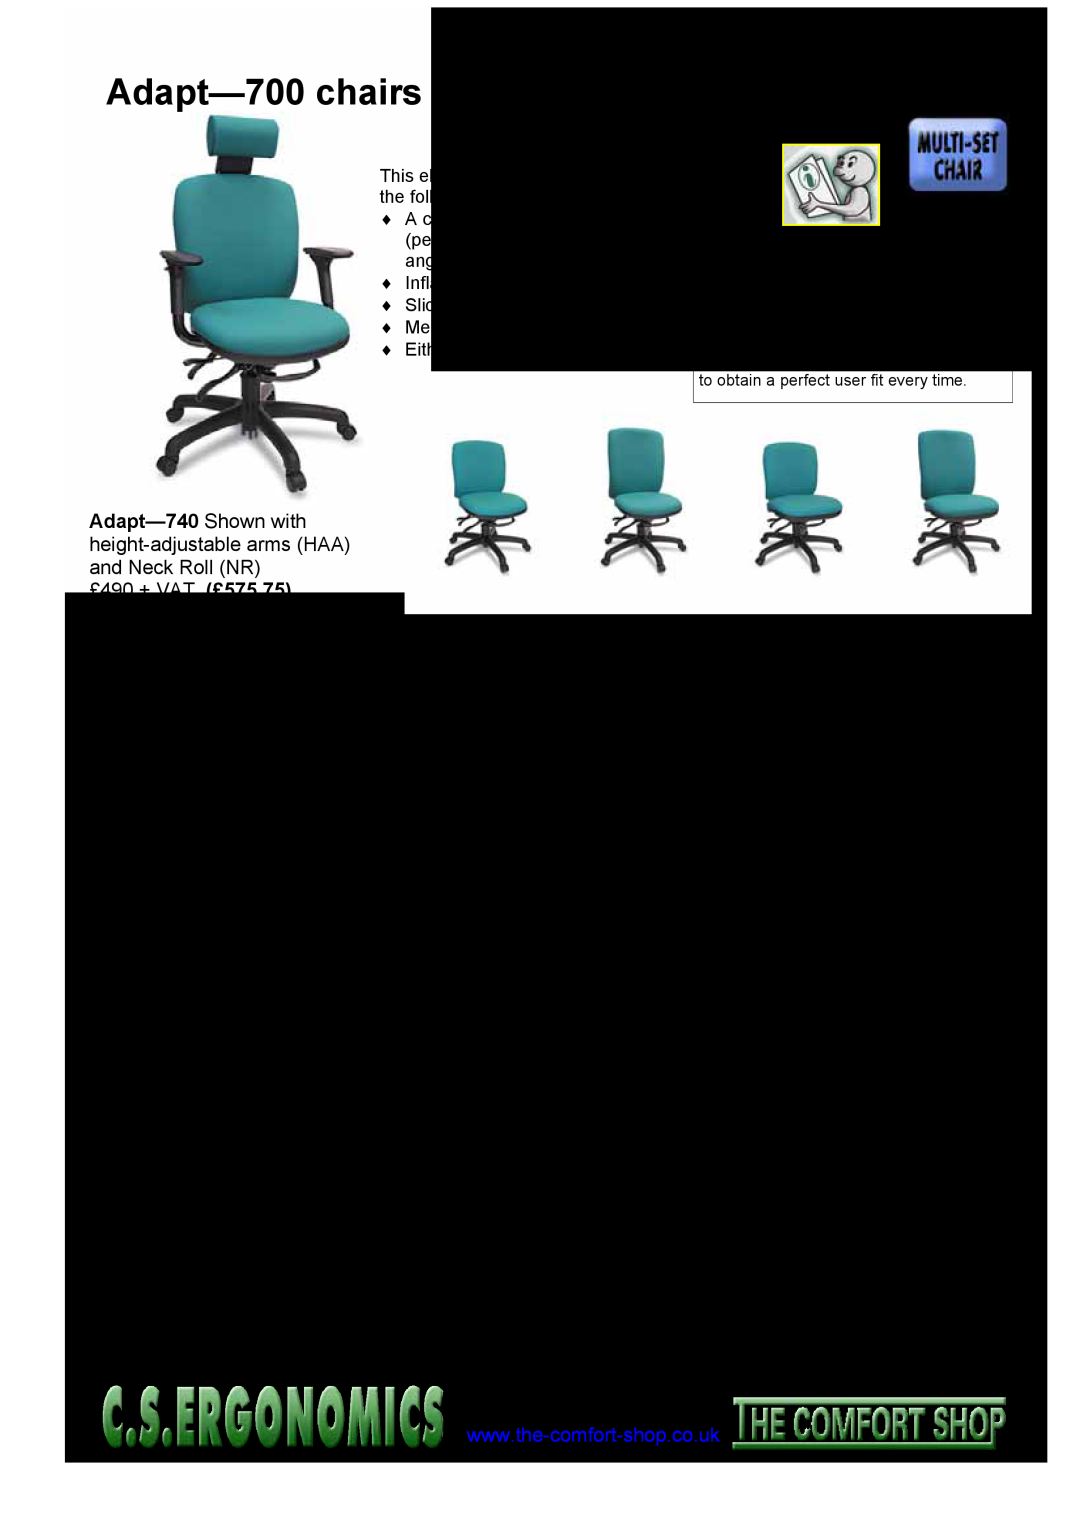 Fellowes RH 400 Adapt—700chairs A Synchronous action chair, Adapt-710, Adapt-720, Adapt-730, Adapt-740, £370 + VAT, Code 